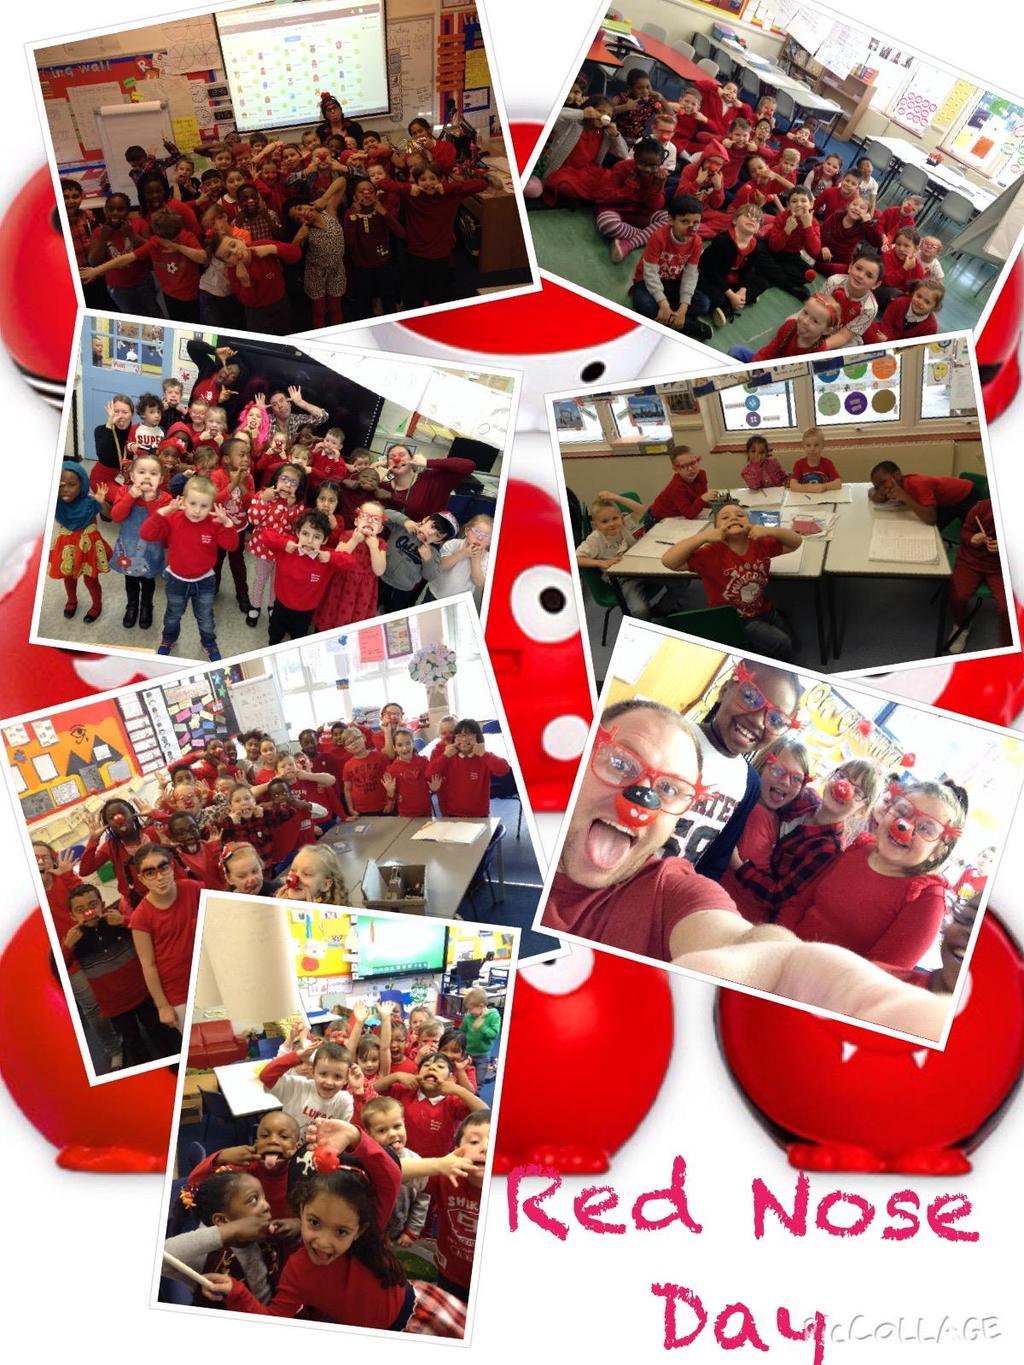 Parsloes Primary School We aspire to achieve well here and beyond. Our school aims: being respectful, understanding, positive and aspirational Newsletter 26 24 th 2017 Happy Red Nose Day!